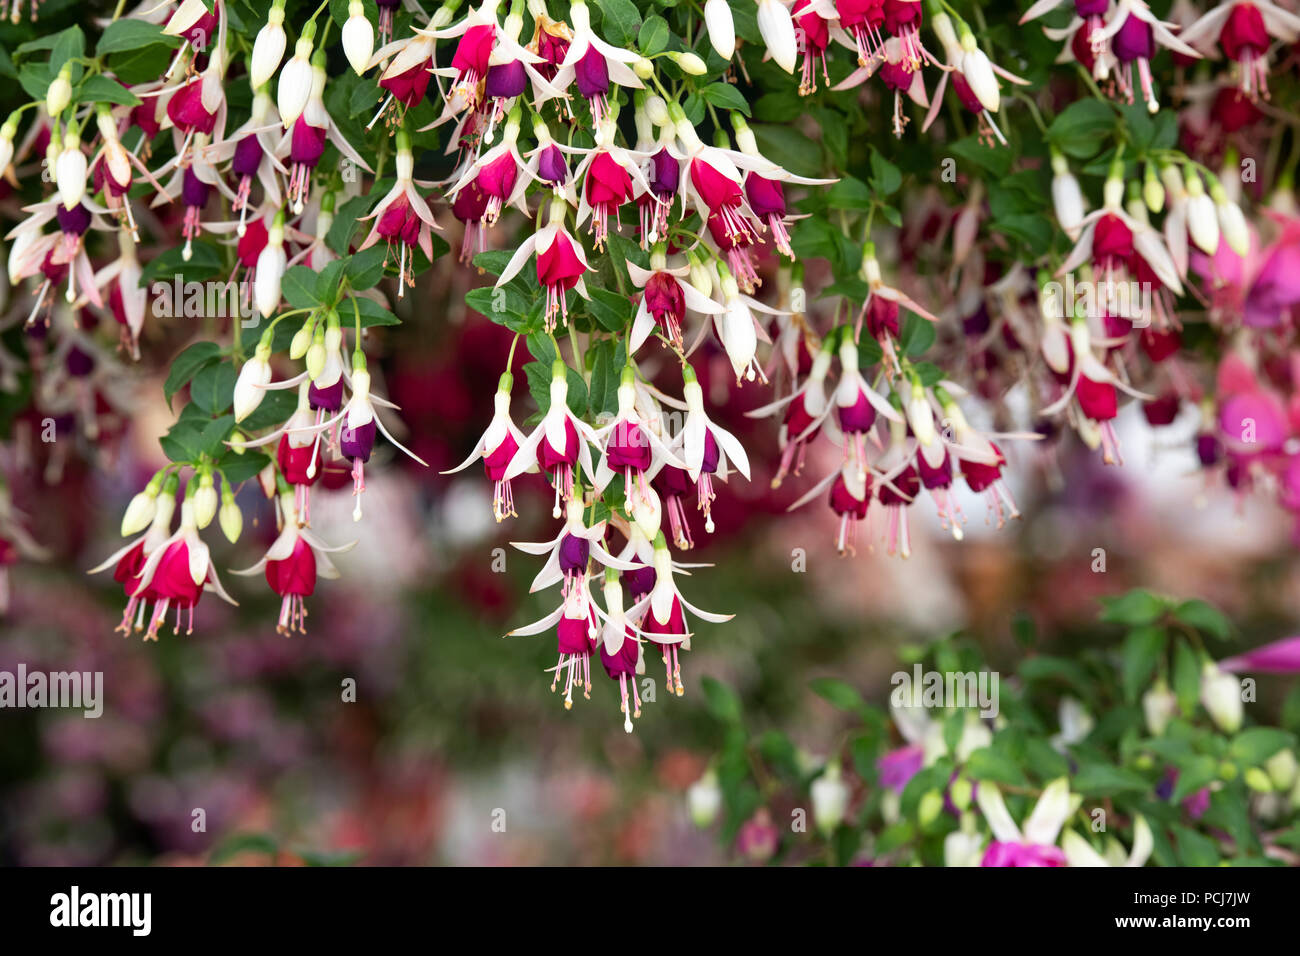 Fuchsia ‘Hermiena’ flowers in a hanging basket Stock Photo